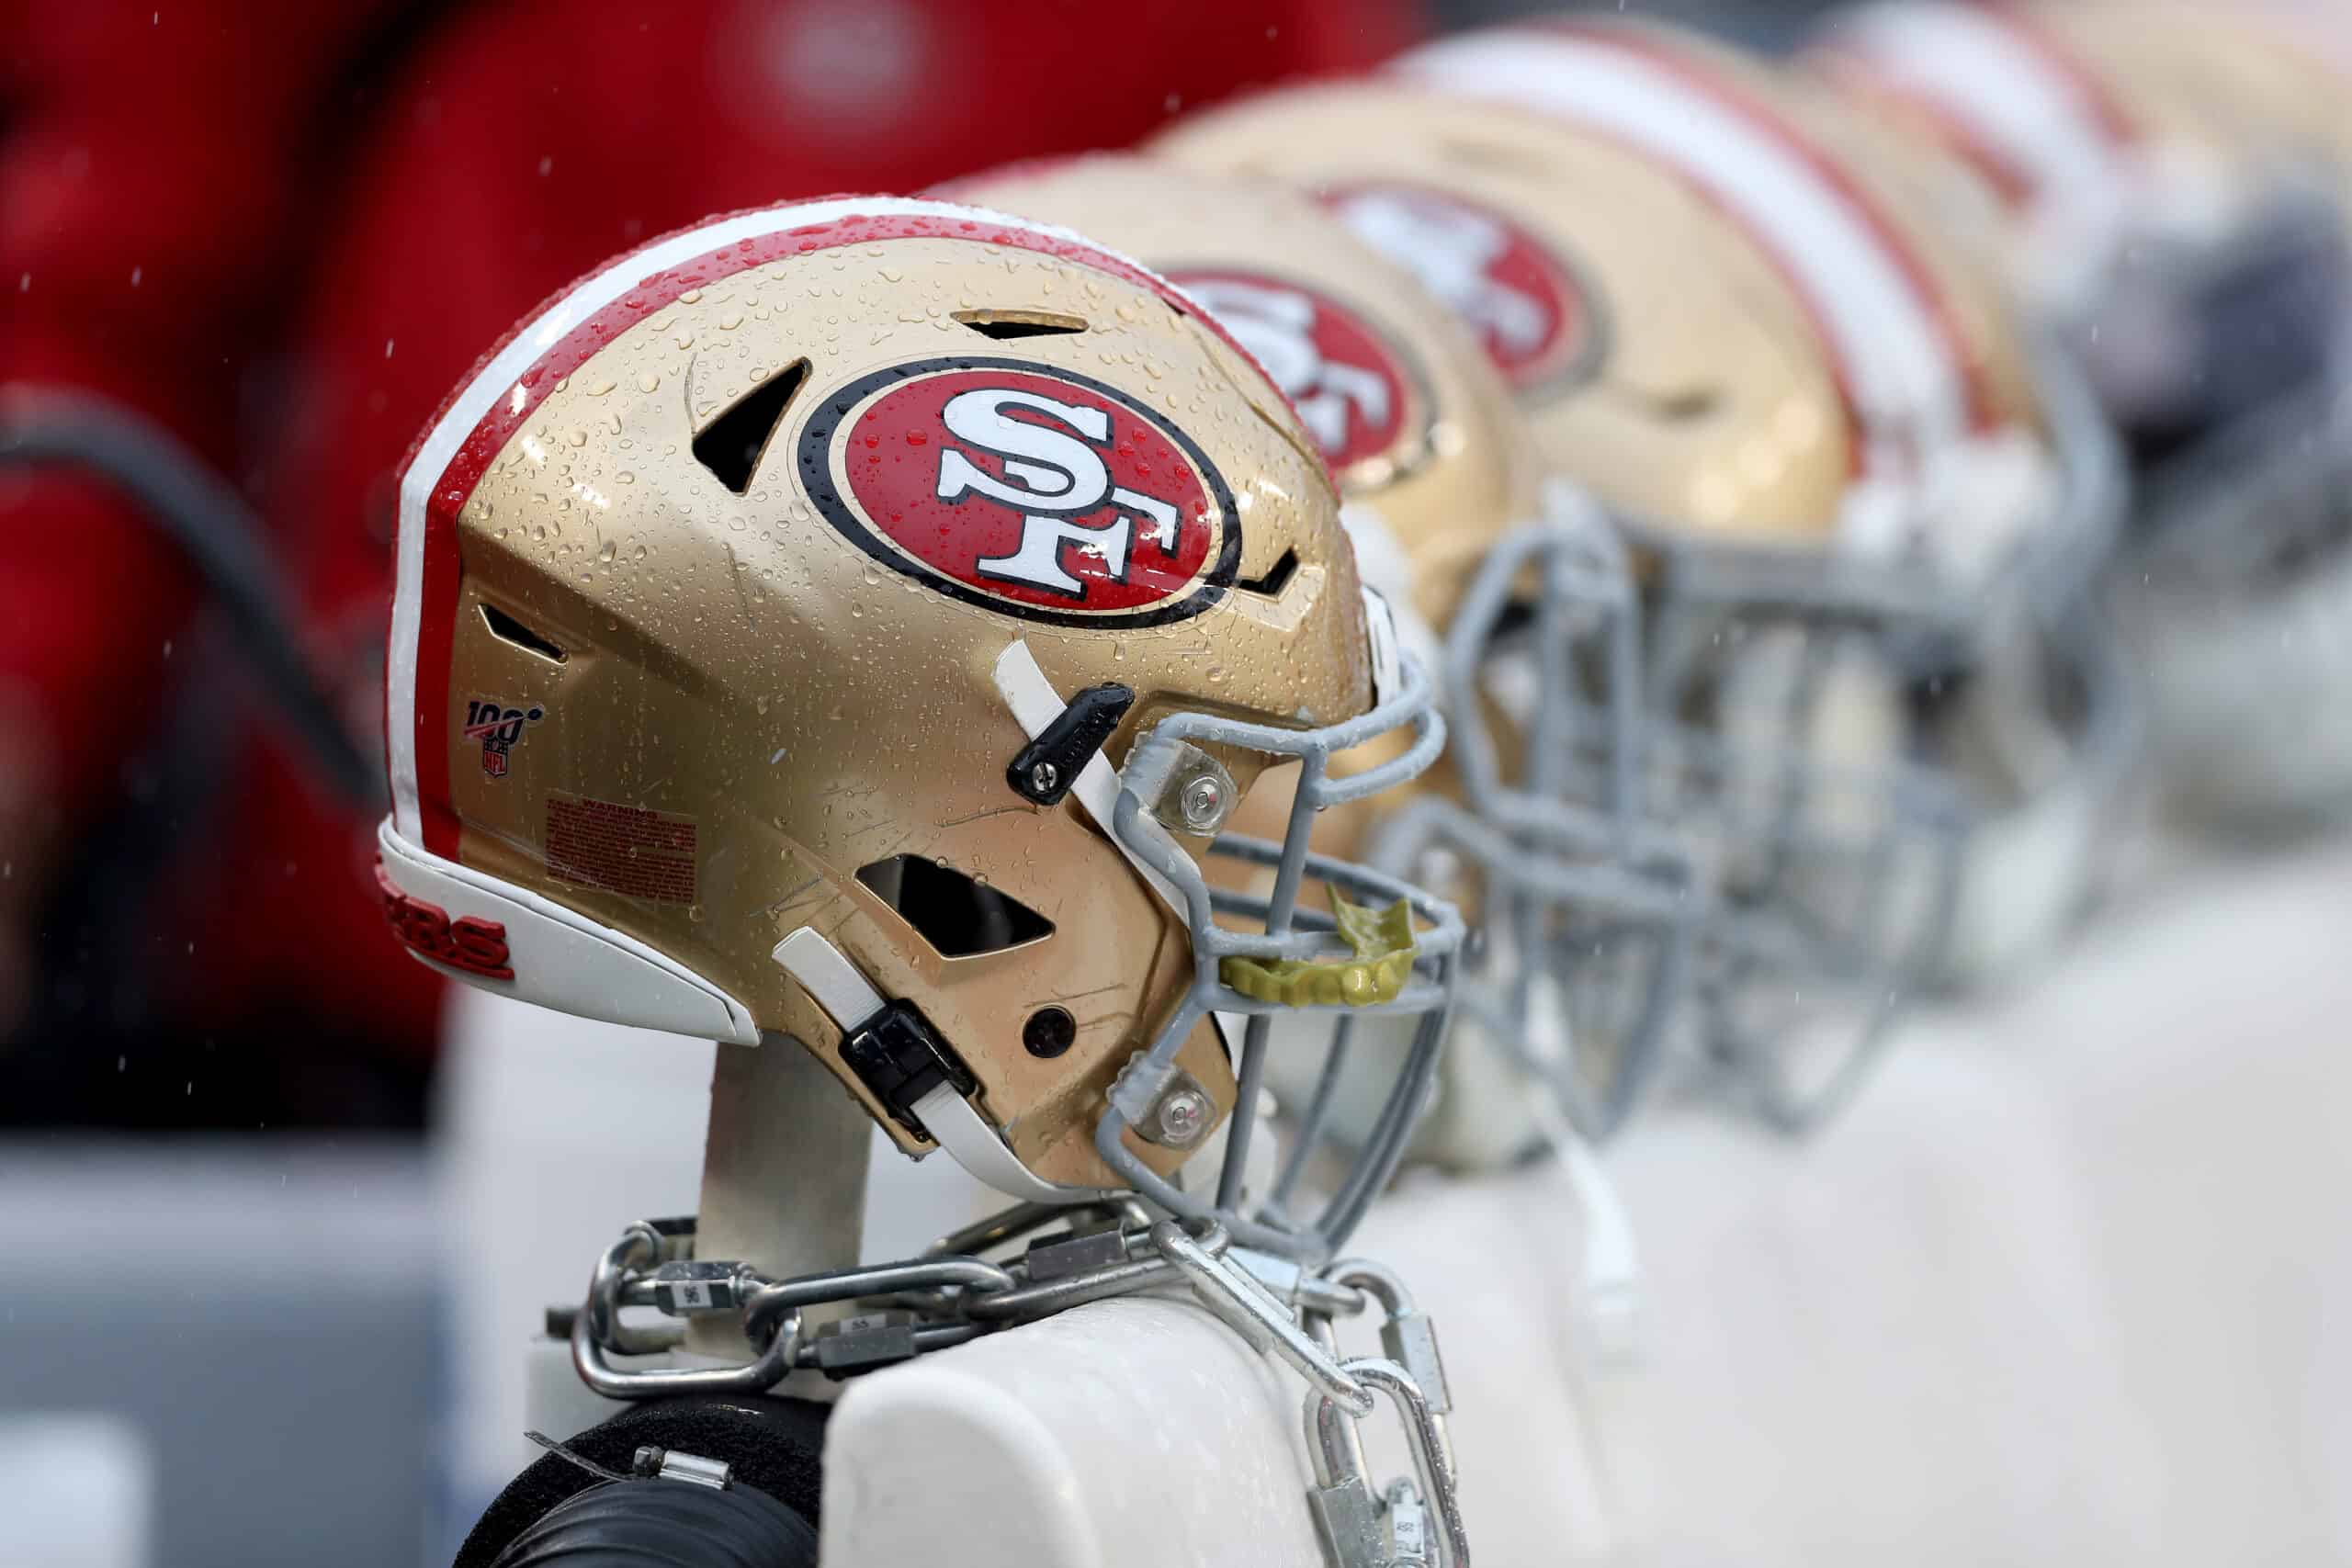 Video Shows Special Gift For 49ers Employees